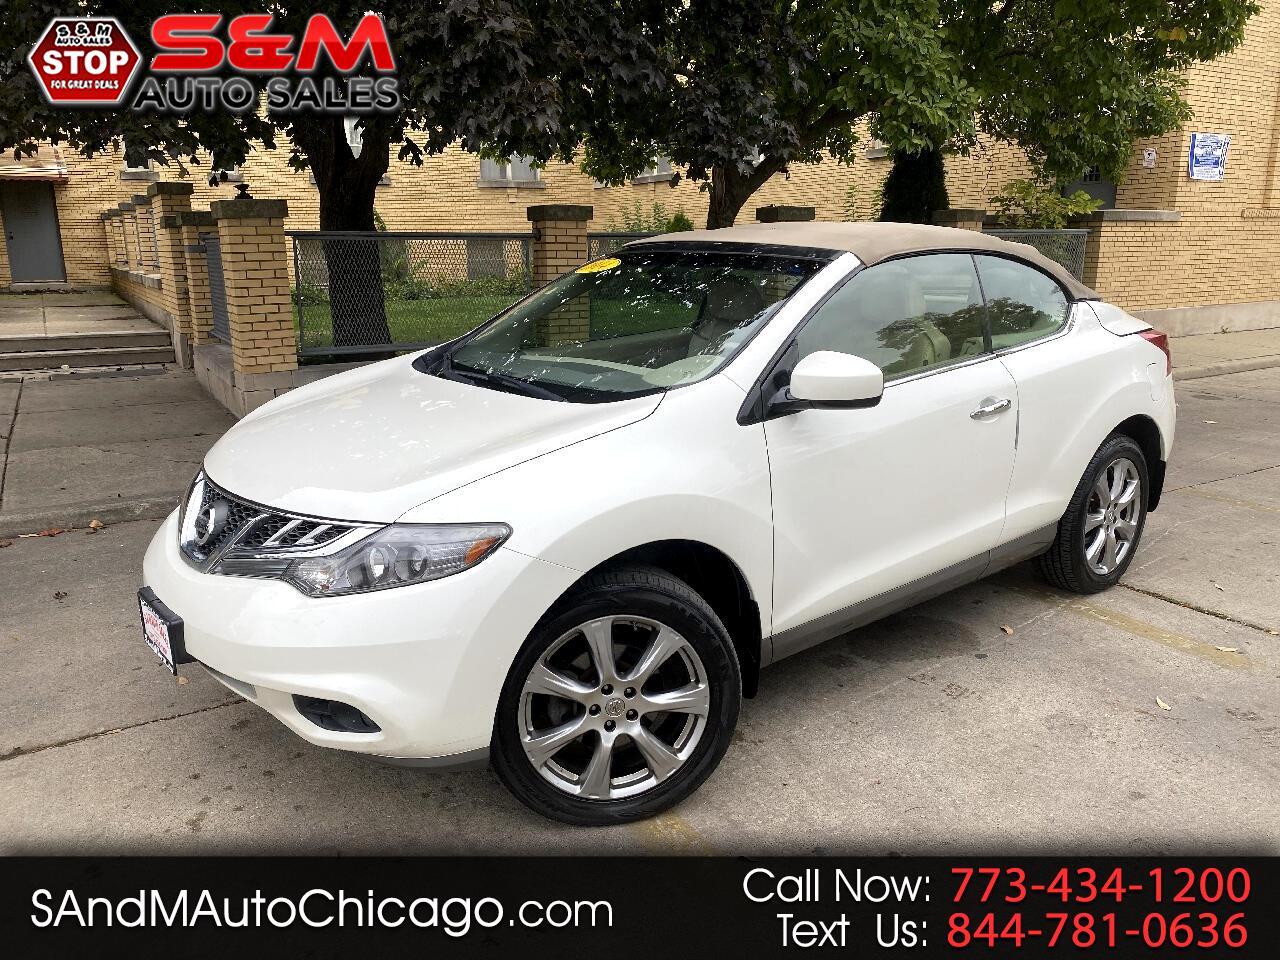 Nissan Murano CrossCabriolet AWD 2dr Convertible 2014